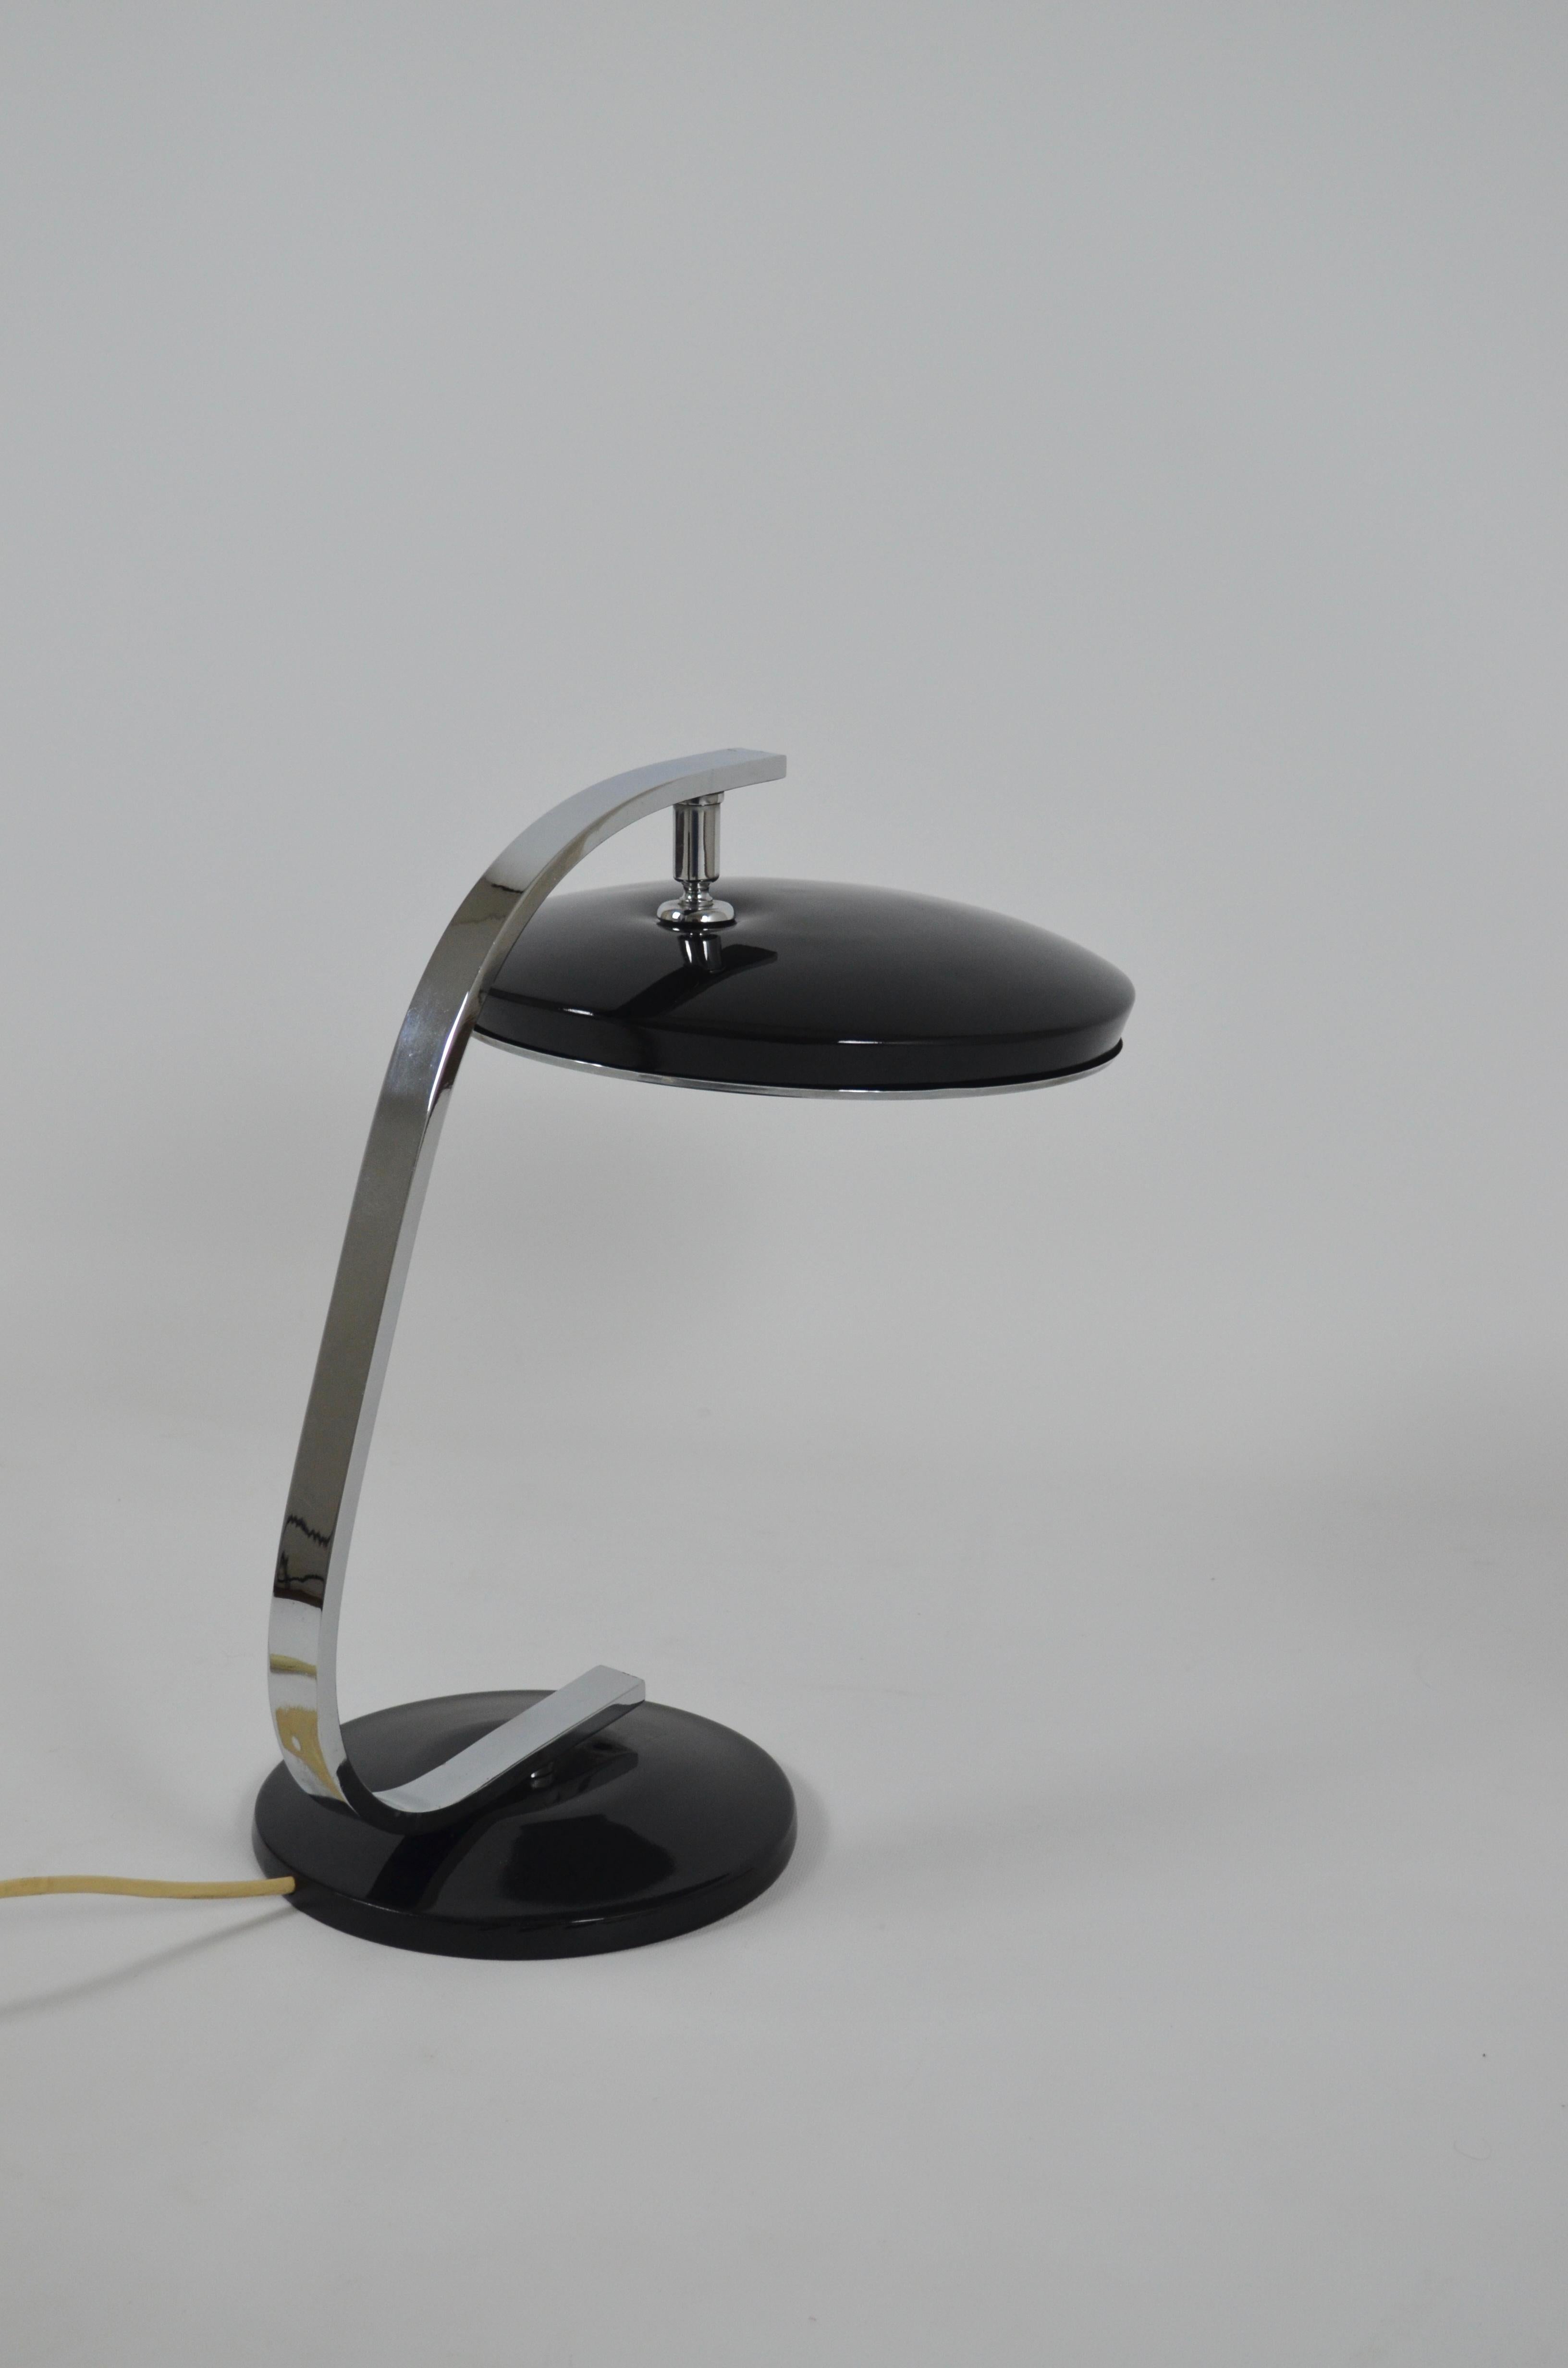 Superb FASE lamp.
Complete with its glass diffuser.
The arms and other chrome elements are in very good condition.
The black lacquered reflector is adjustable.
Elegant and practical.
Model made in Spain in the 60s/70s